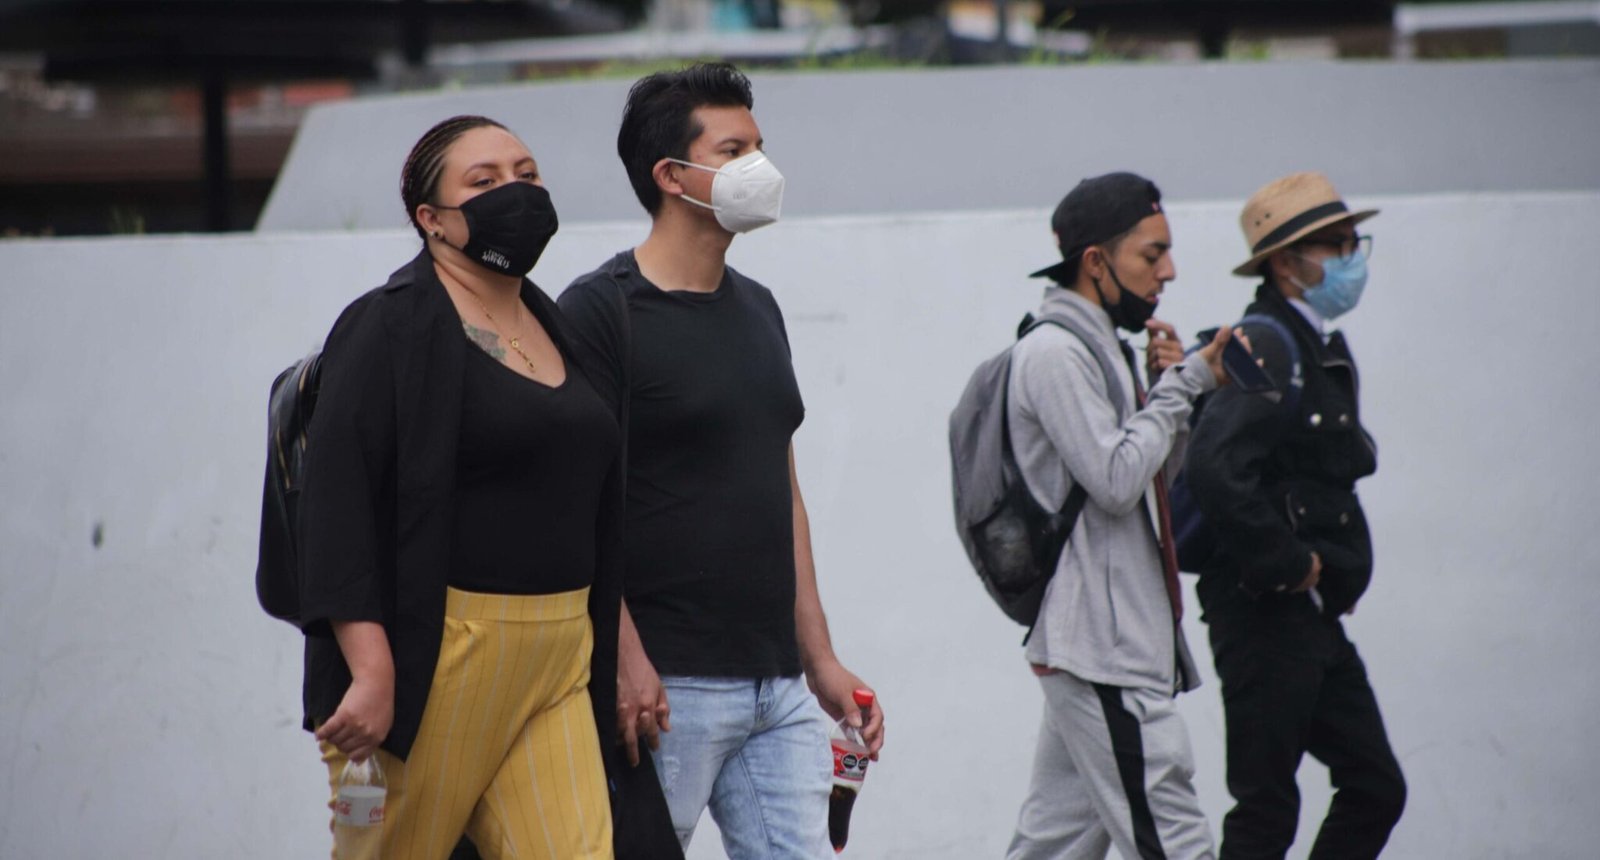 People are seen wearing masks in Mexico City